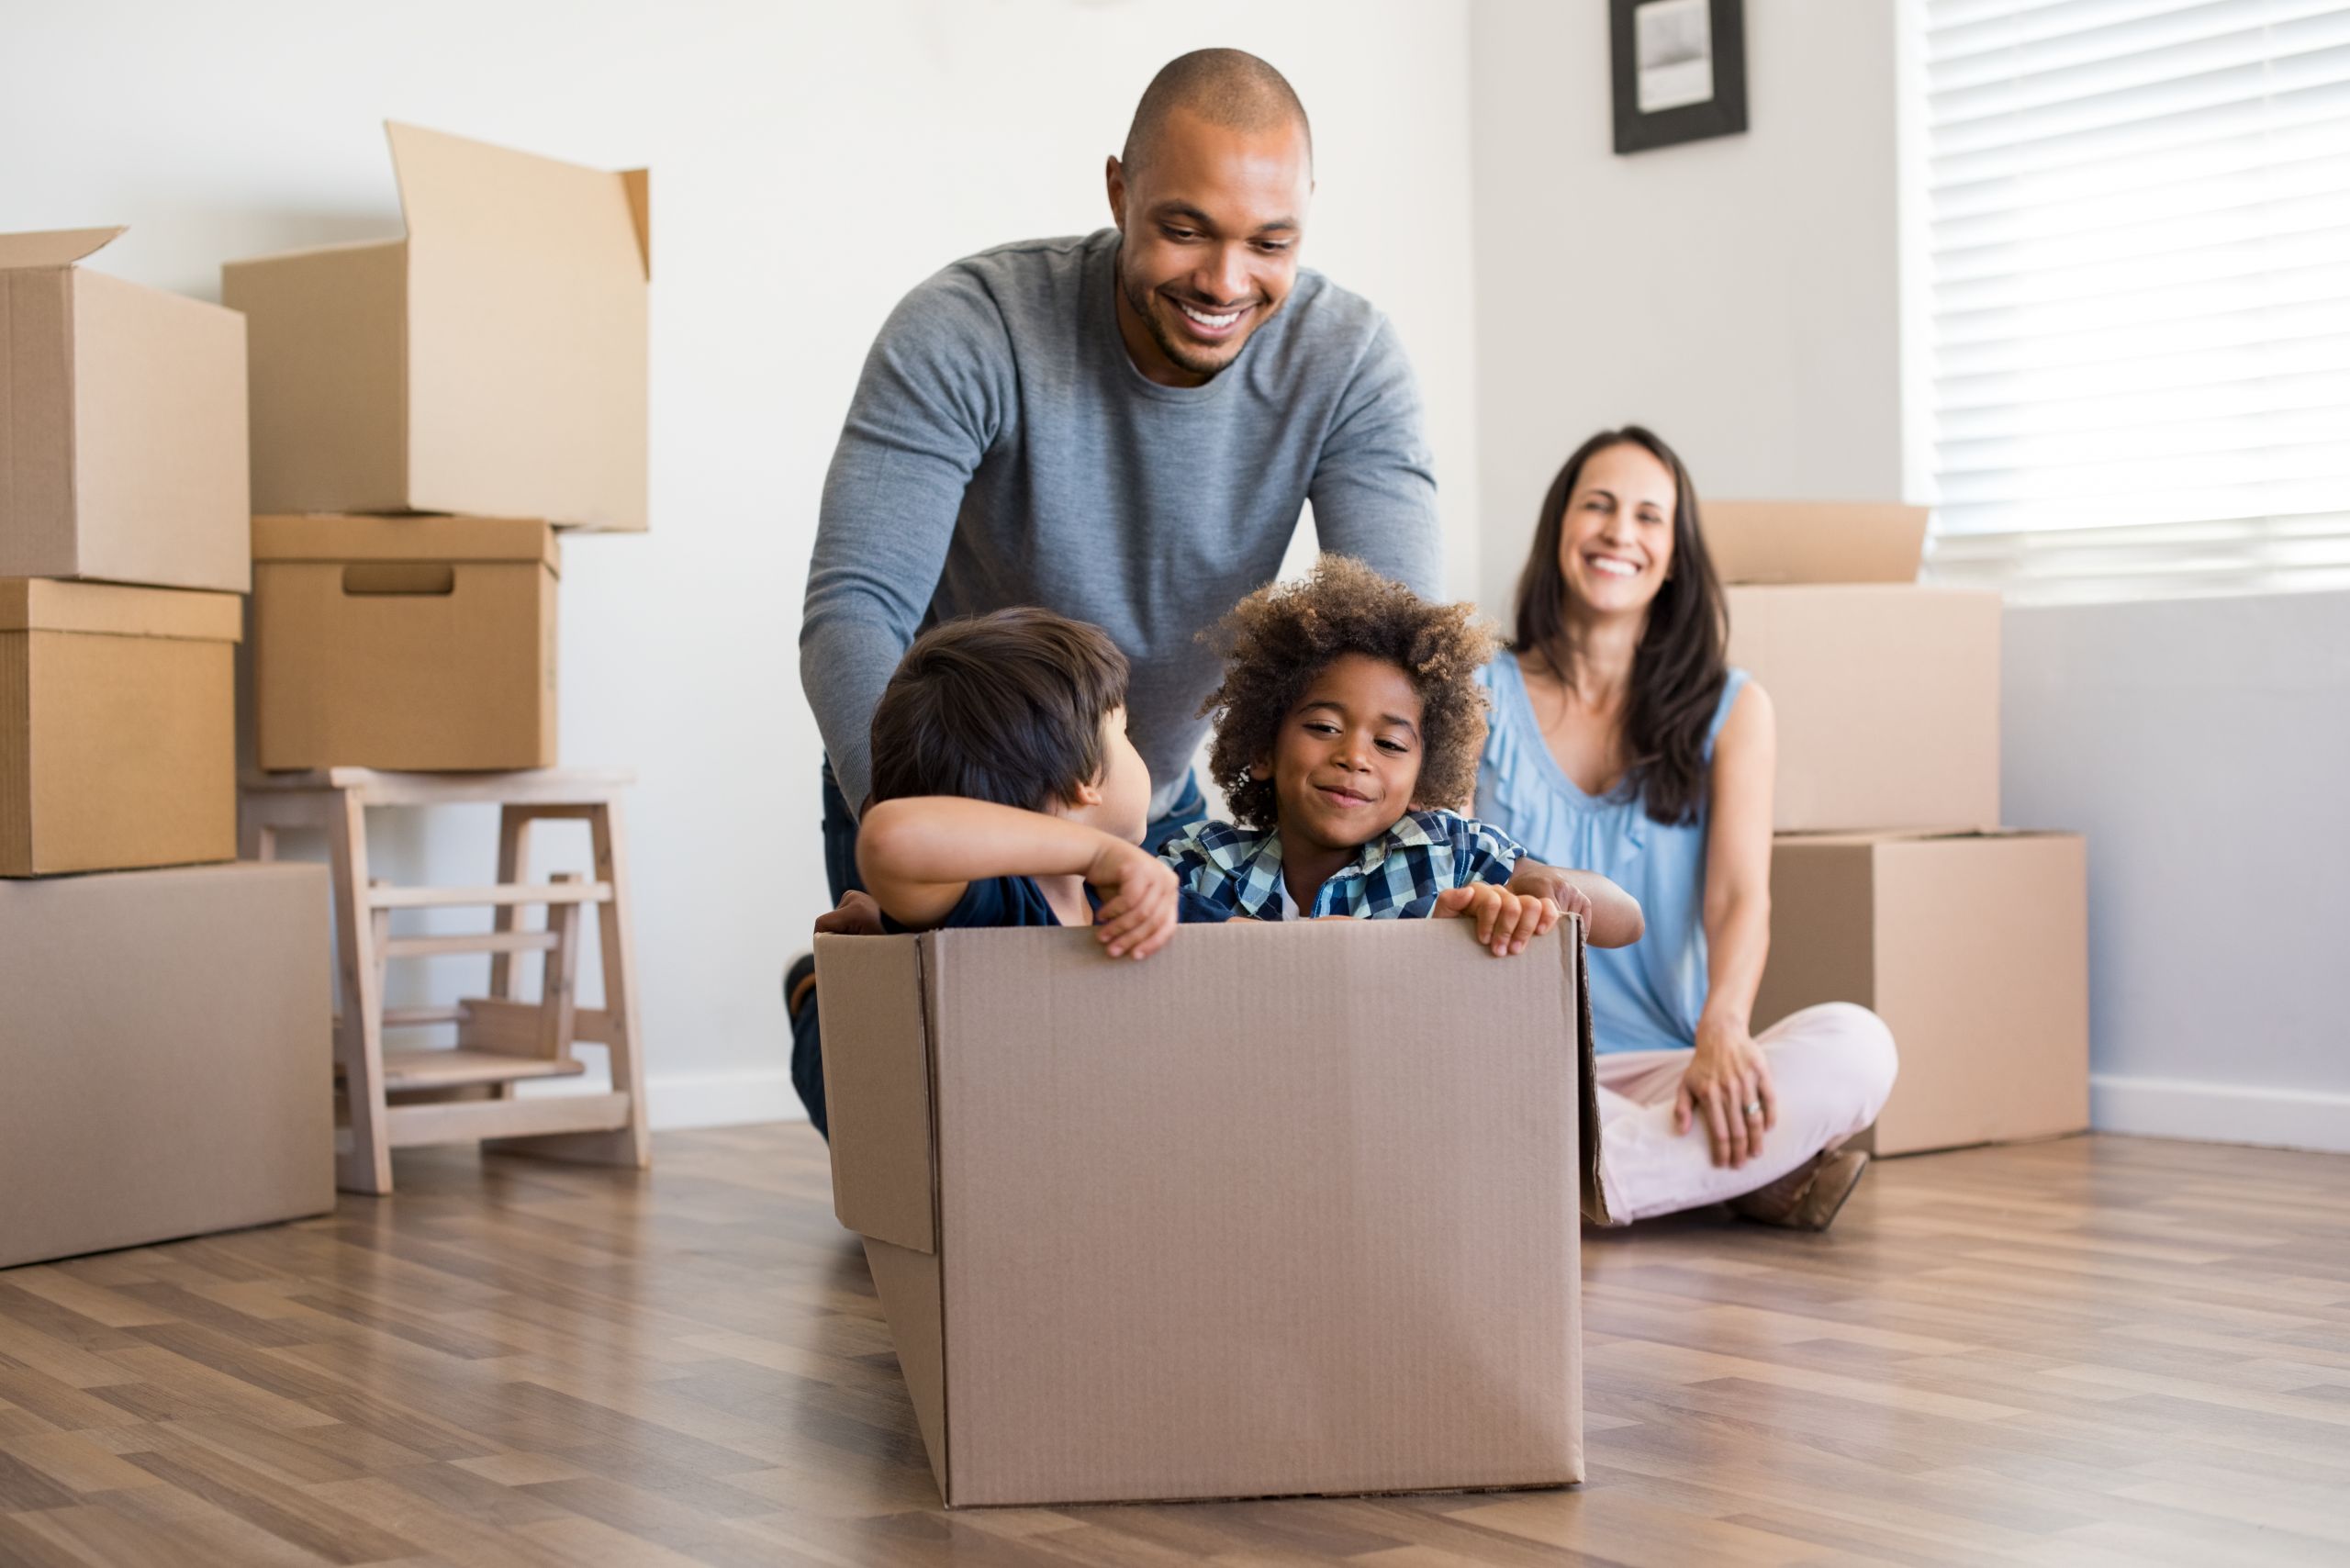 Happy african american father playing with children sitting in carton box at new home. Happy multiethinc family enjoying new home. Young parents and sons having fun during moving house.